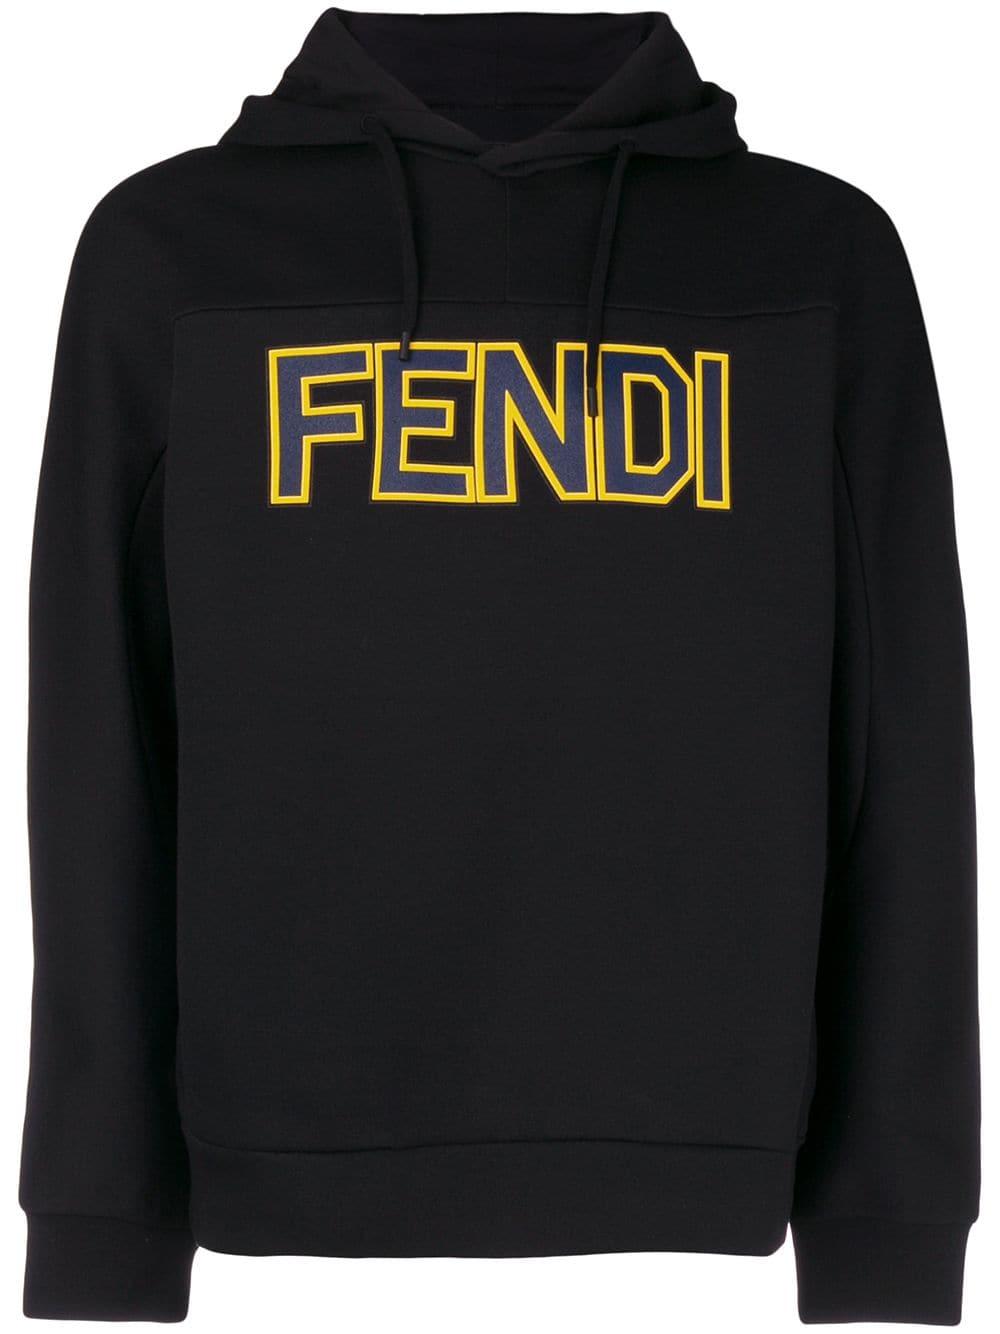 Fendi Cotton Logo Patch Hoodie in Black for Men - Save 60% - Lyst